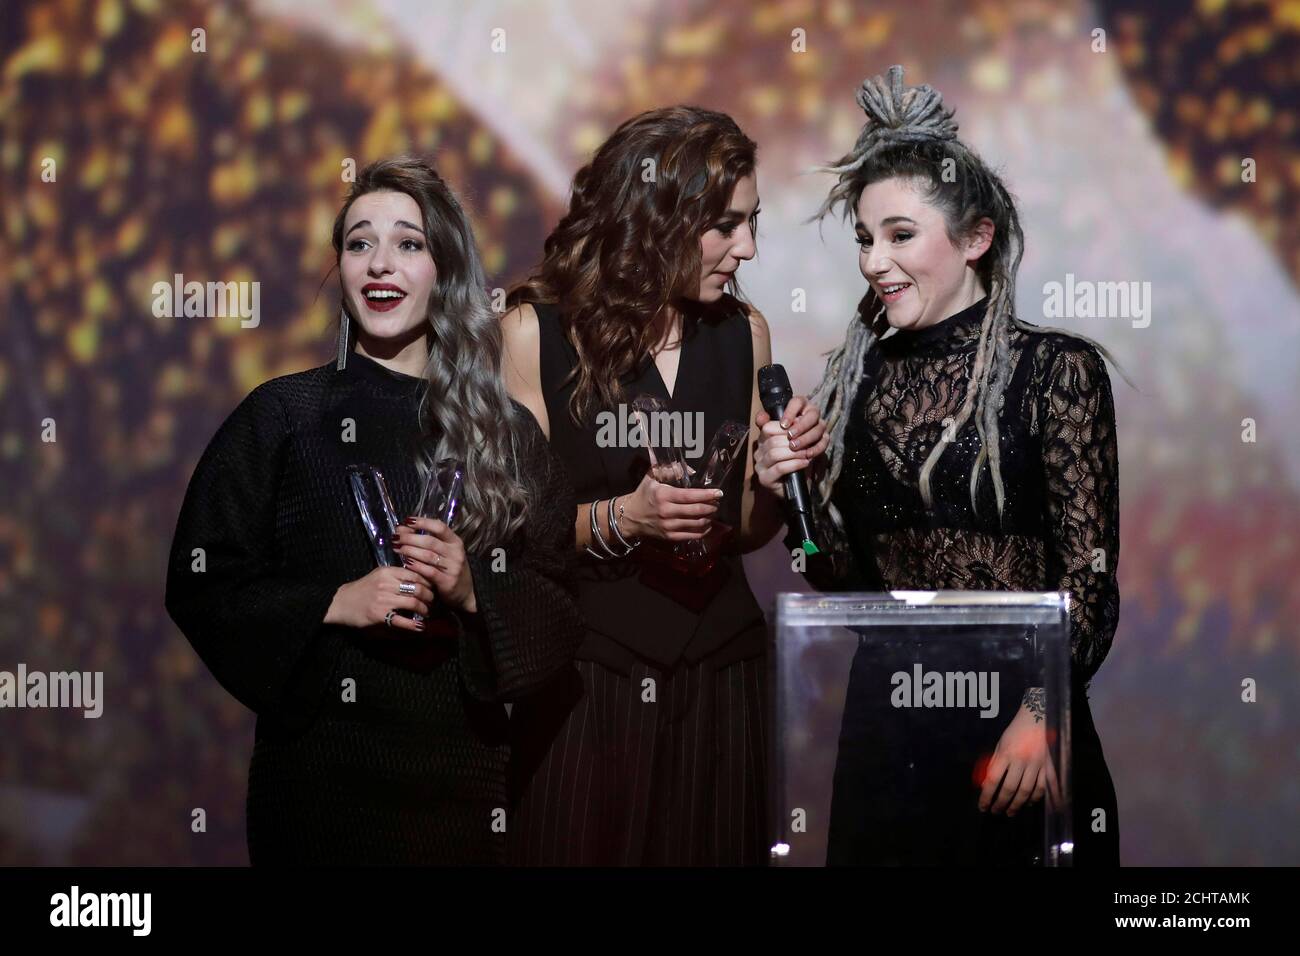 French band L.E.J members singer Elisa Paris, French singer Lucie Lebrun  and Juliette Saumagne react after receiving their tour revelation award  during the 32nd Victoires de la Musique French music awards ceremony